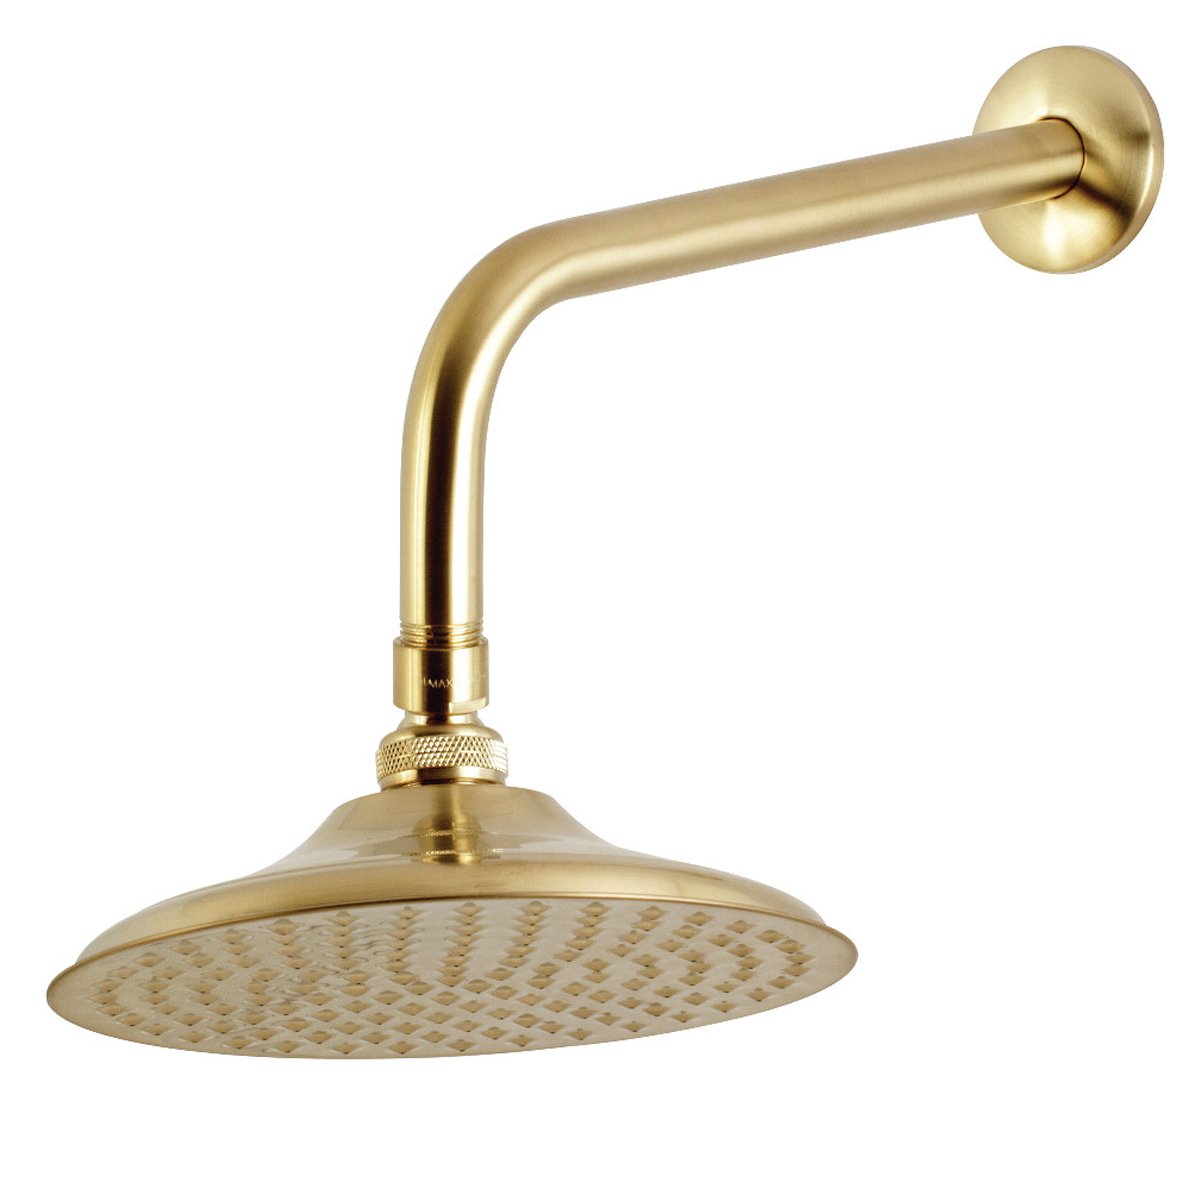 Kingston Brass Victorian 8" Brass Shower Head with 12" Shower Arm in Brushed Brass